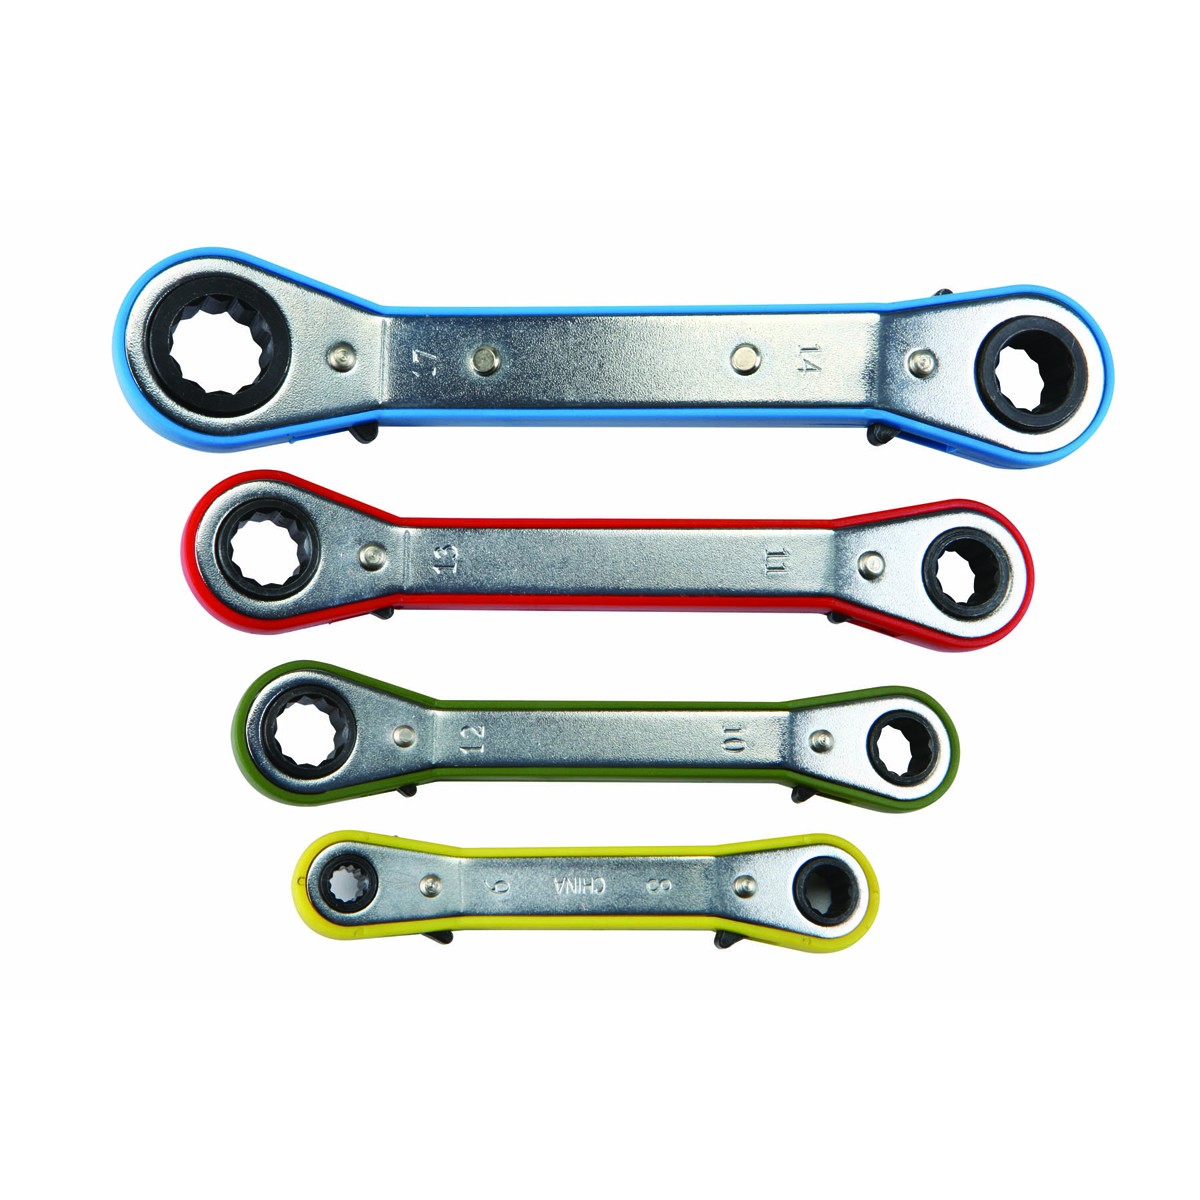 4 Pc Metric Offset Ratcheting Wrench Set